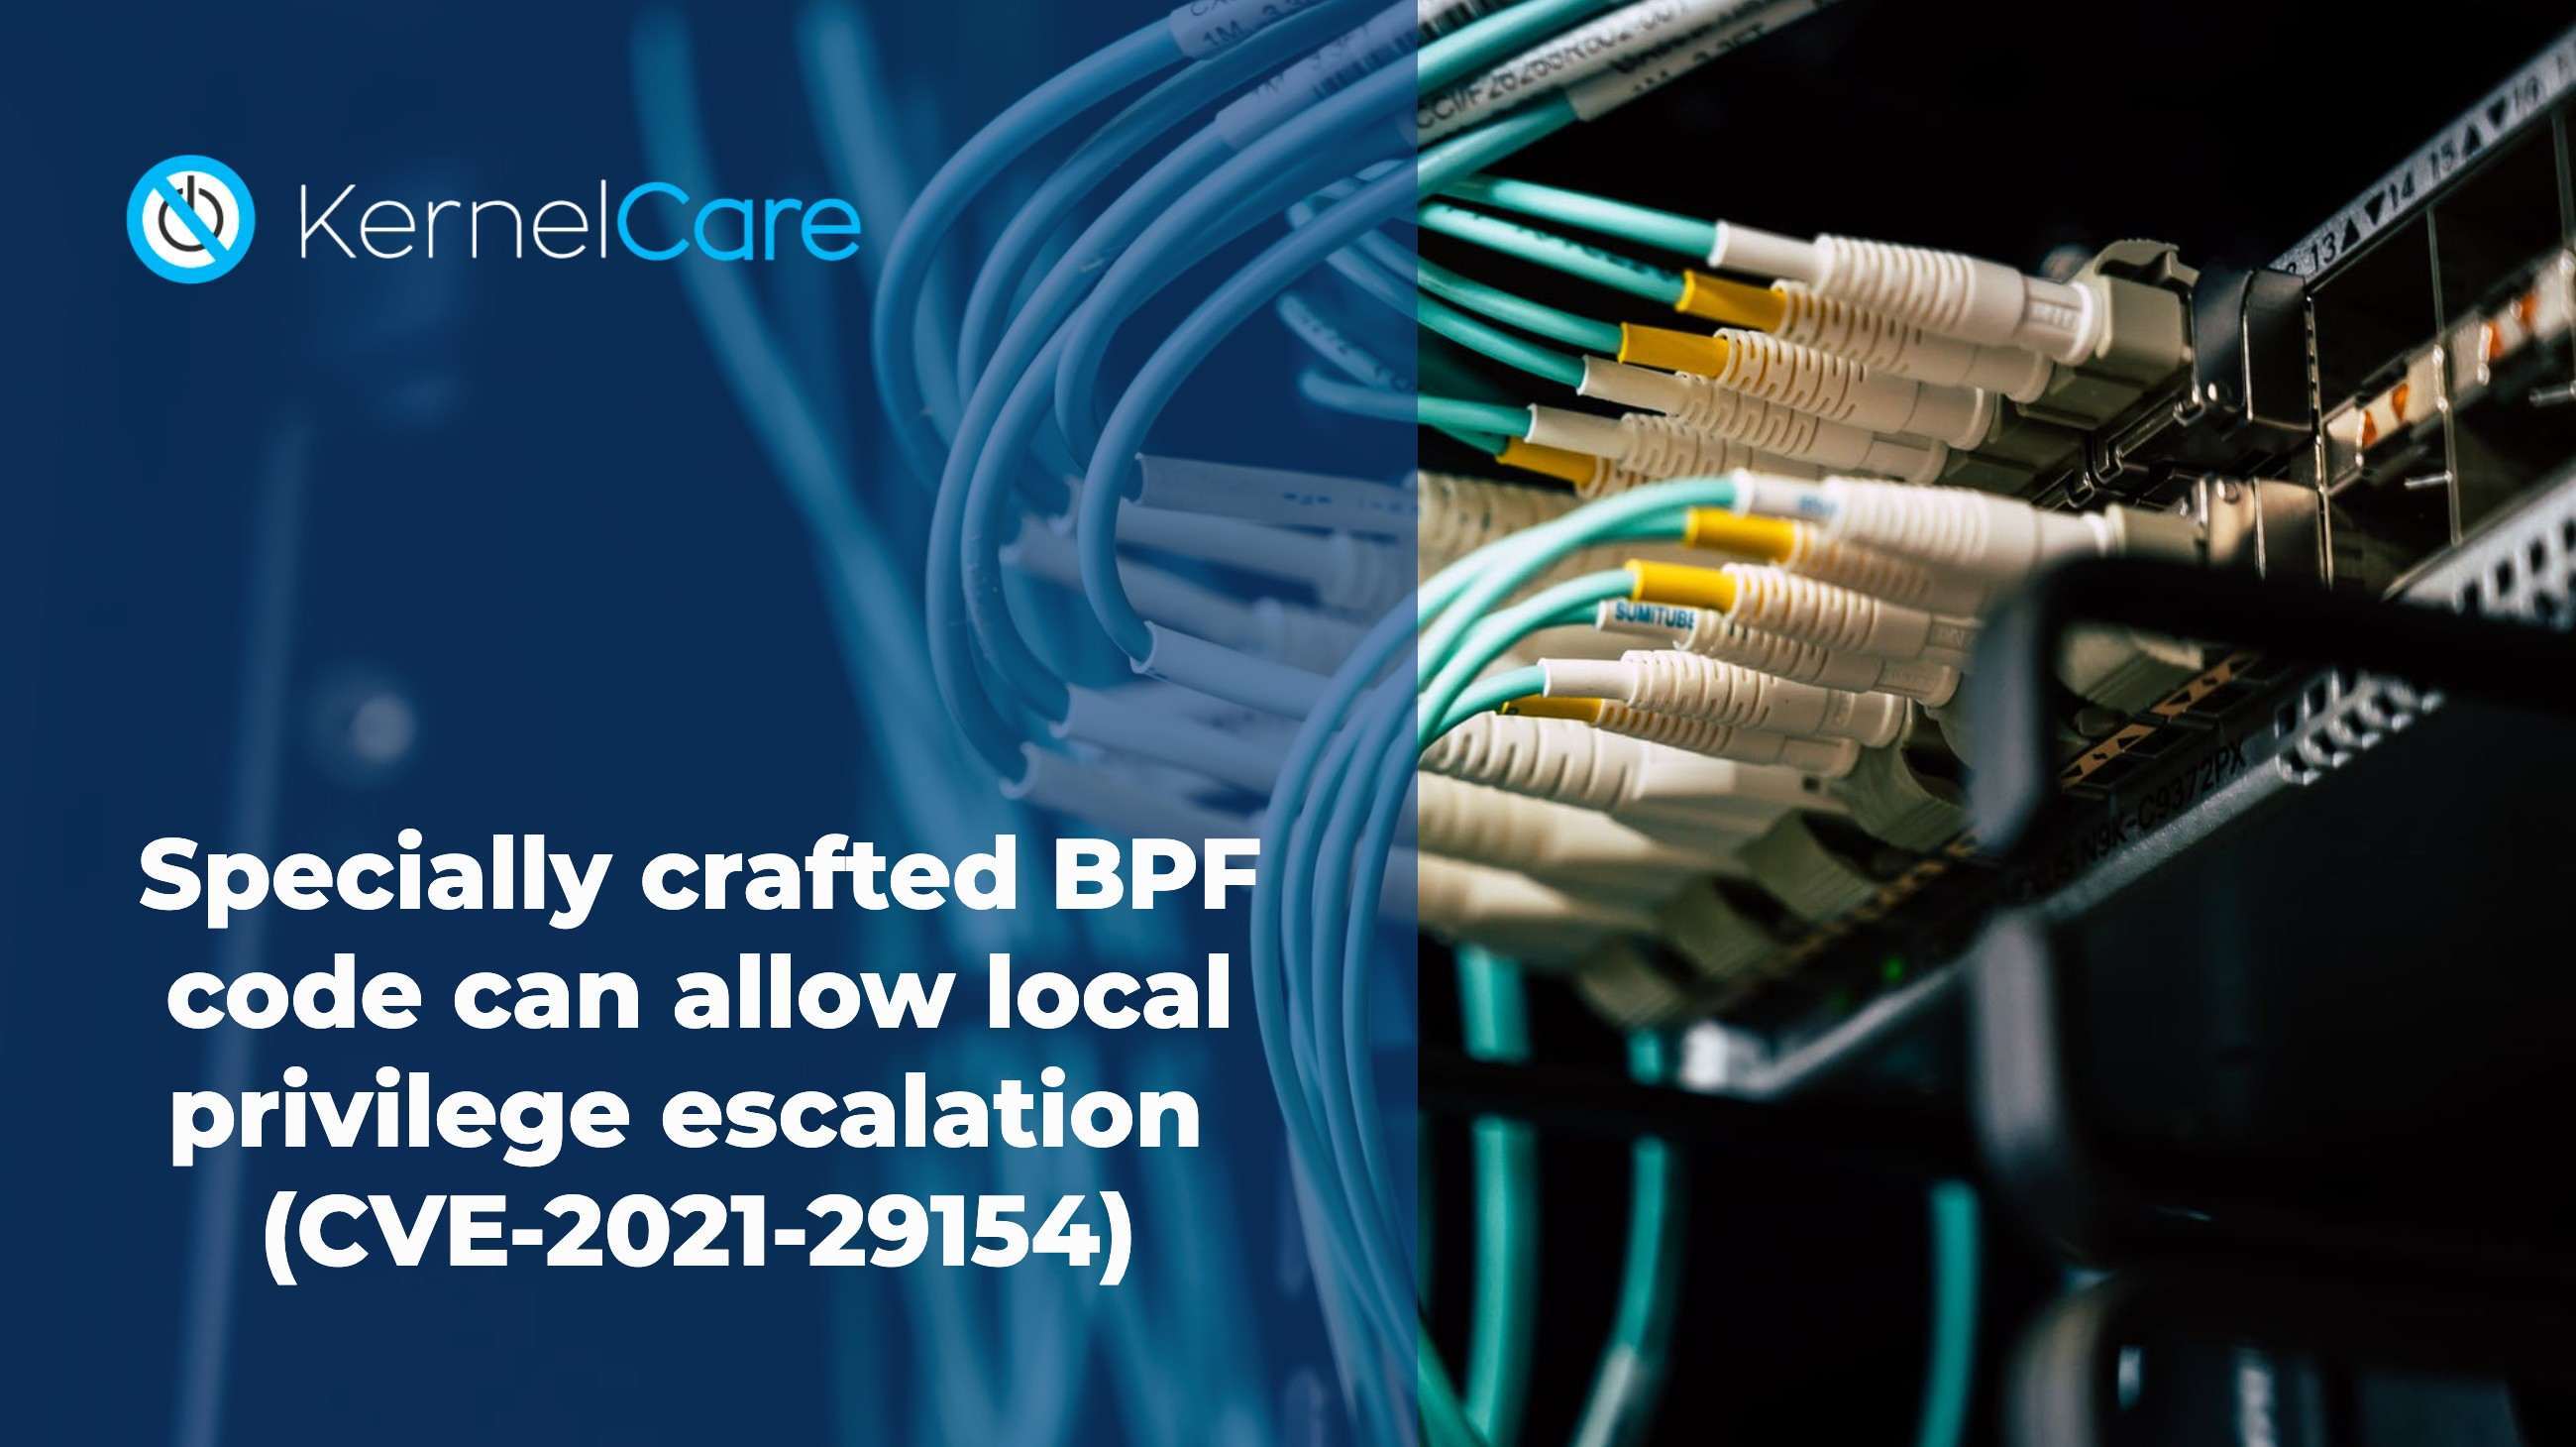 Another vulnerability targeting the BPF subsystem has been disclosed publicly in the past few days (CVE-2021-29154). It allows users on a system running non-default configuration of the BPF subsystem to run specially crafted code as a BPF filter and run arbitrary executable code in the kernel context.   According to vendors, it affects all distributions running kernels up to version 5.11.12. Distribution vendors are starting to deliver patches through their update mechanisms, and KernelCare is also finalizing patches for it’s rebootless patching process to address this issue.  Because of the nature of the BPF functionality, which is to allow user code to interact with network packet processing within the kernel, there is a very big potential for attack given any weakness in the implementation. This specific functionality has been addressed recently in the specter mitigation code bug discussed here.  To be vulnerable, a system would have to be configured to allow BPF JIT compilation (for example, by setting “net.core.bpf_jit_enable = 1”). This is often the case in situations where regular users are doing work related to sockets’ manipulation or in seccomp (secure computing mode) environments where permissions are granted more granularly than normal.  The actual vulnerable code resides in arch/x86/net/bpf_jit_comp.c and arch/x86/net/bpf_jit_comp32.c in the kernel source code tree. The flaw comes from the way branch displacement happens when the user code is compiled, by making wrong assumptions regarding the address of code during optimization.  Proper exploitation of this vulnerability could even lead to container or chroots’ escape, since the kernel is shared between them, and running code in the kernel context permits it to escape containerization limits.  As a stop-gap procedure, you can quickly disable BPF JIT by running:  # echo 0/> /proc/sys/net/core/bpf_jit_enable   Which will persist until reversed or a system reboot. A more permanent removal can be achieved by using your distribution’s syscfg equivalent utility to set “net.core.bpf_jit_enable=0” at boot time. Of course, this type of solution solves the problem by disabling the functionality, which in itself is self-defeating. If you actually had your system configured to use BPF JIT, in all likelihood your use case needed that setting explicitly enabled, and you should rely instead on proper kernel patching, either through your distribution vendor’s patches or through KernelCare’s rebootless process.” width=”2600″ loading=”lazy” style=”width: 2600px;”></p>
<p style=